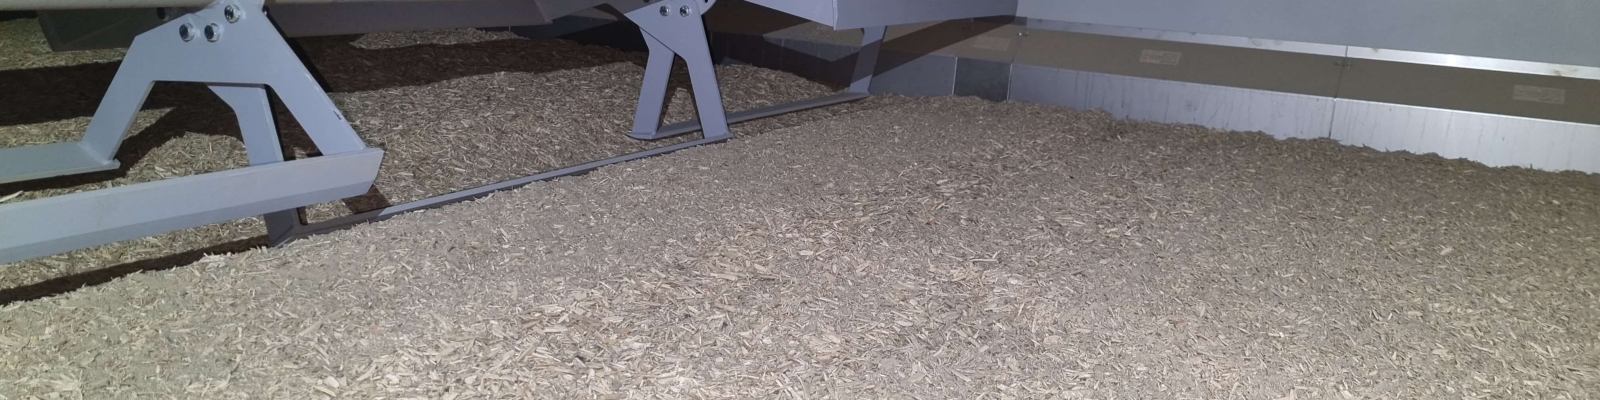 Drying of woodchips on a belt dryer